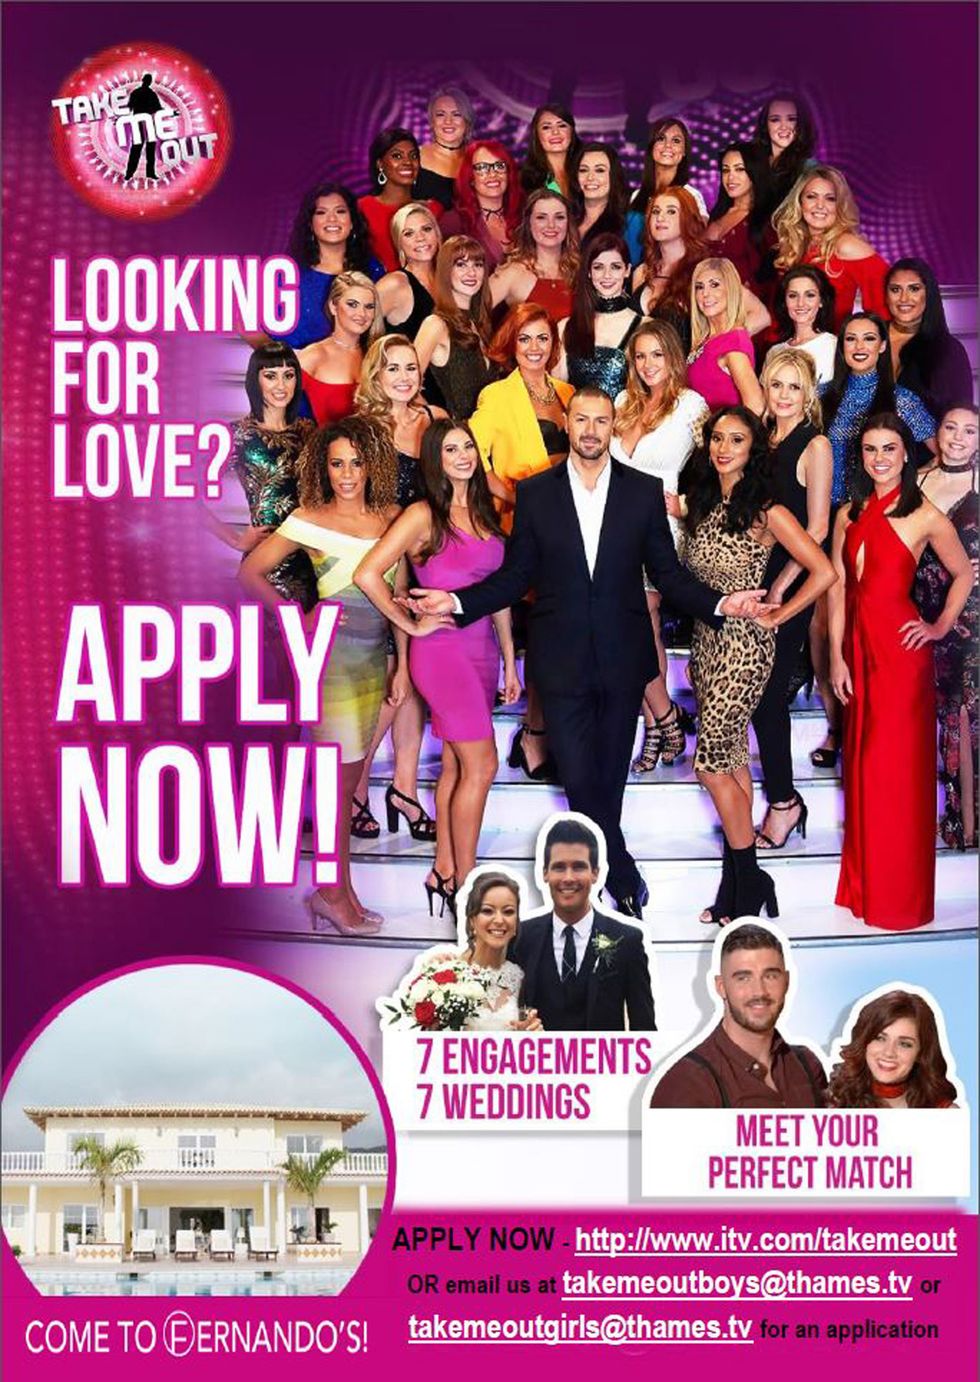 Take Me Out is looking for new contestants – here's how to apply